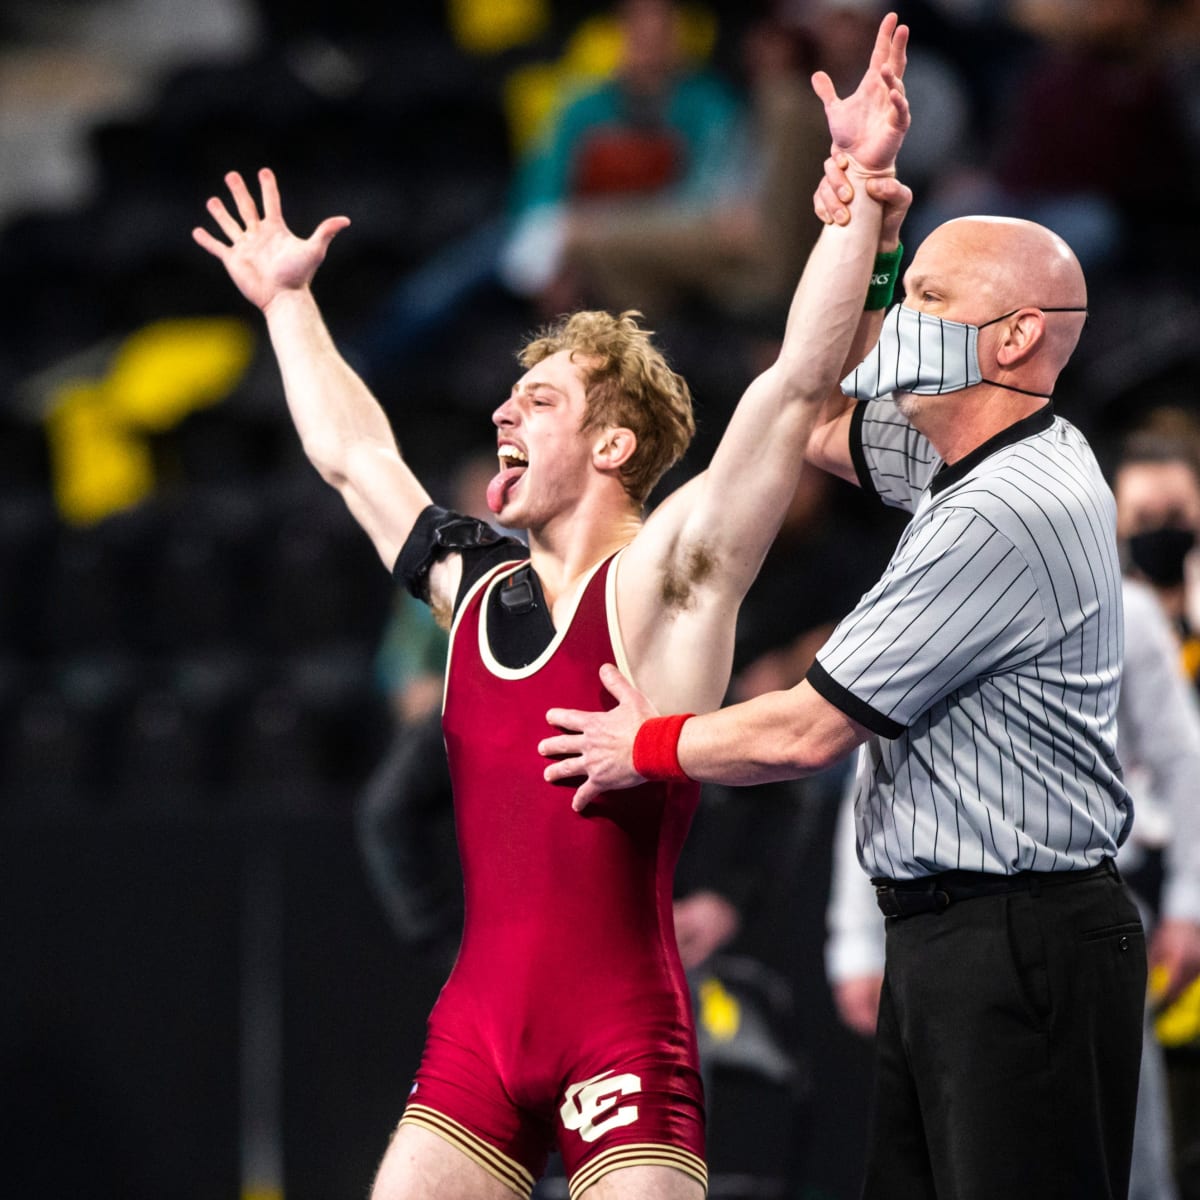 North Carolina at Nebraska in College Wrestling Live Stream Watch Online, TV Channel, Start Time - How to Watch and Stream Major League and College Sports